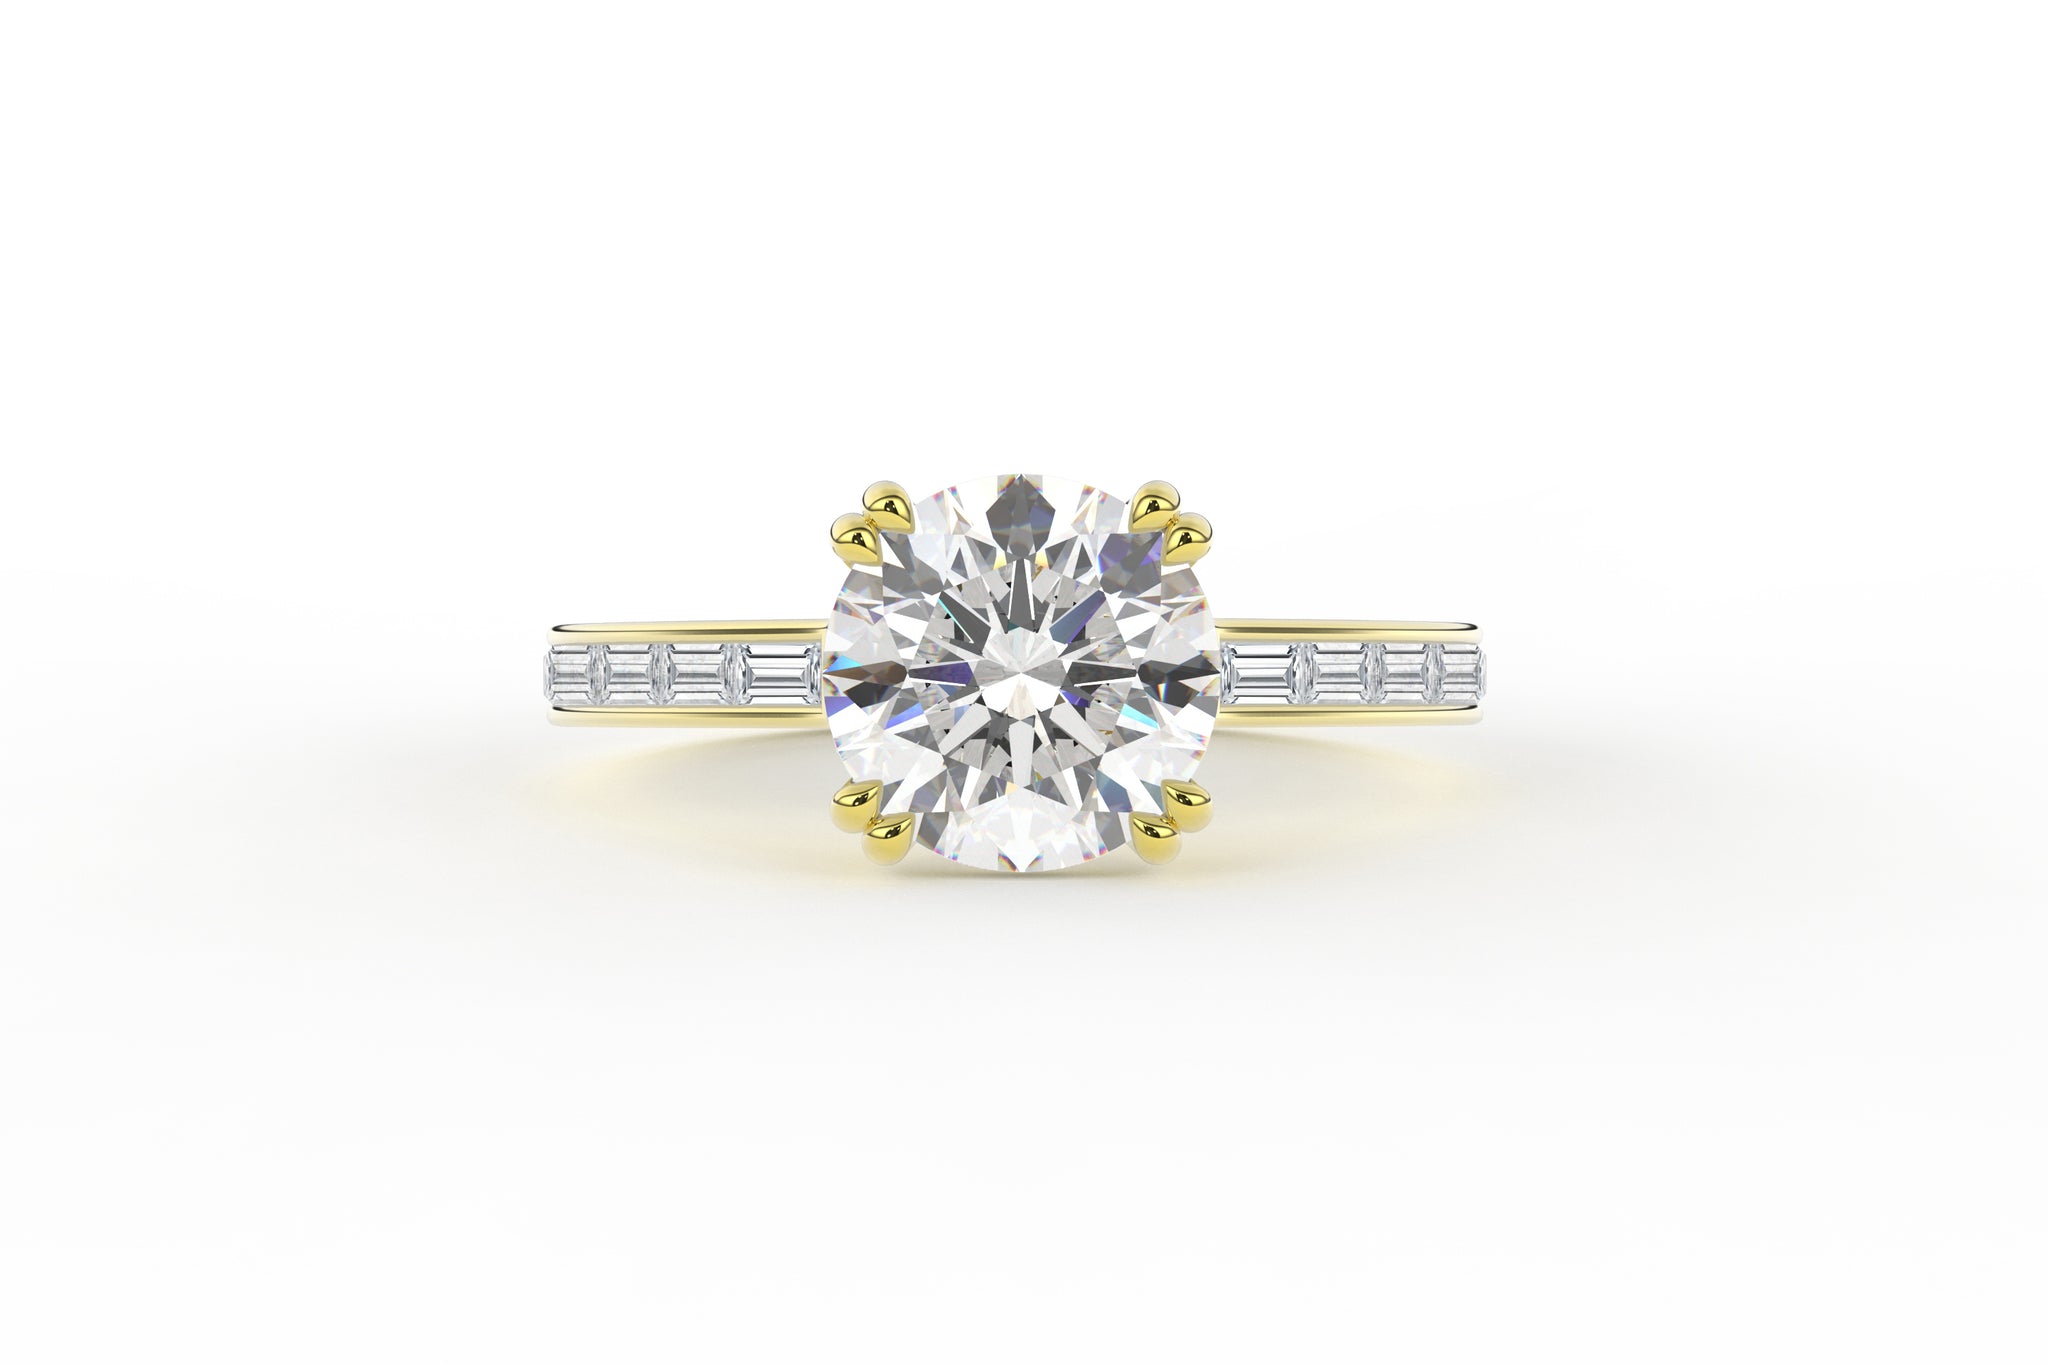 Cathedral Double Four Prong Baguette Diamond Side Lab Low Profile Diamond Ring - S. Kind & Co